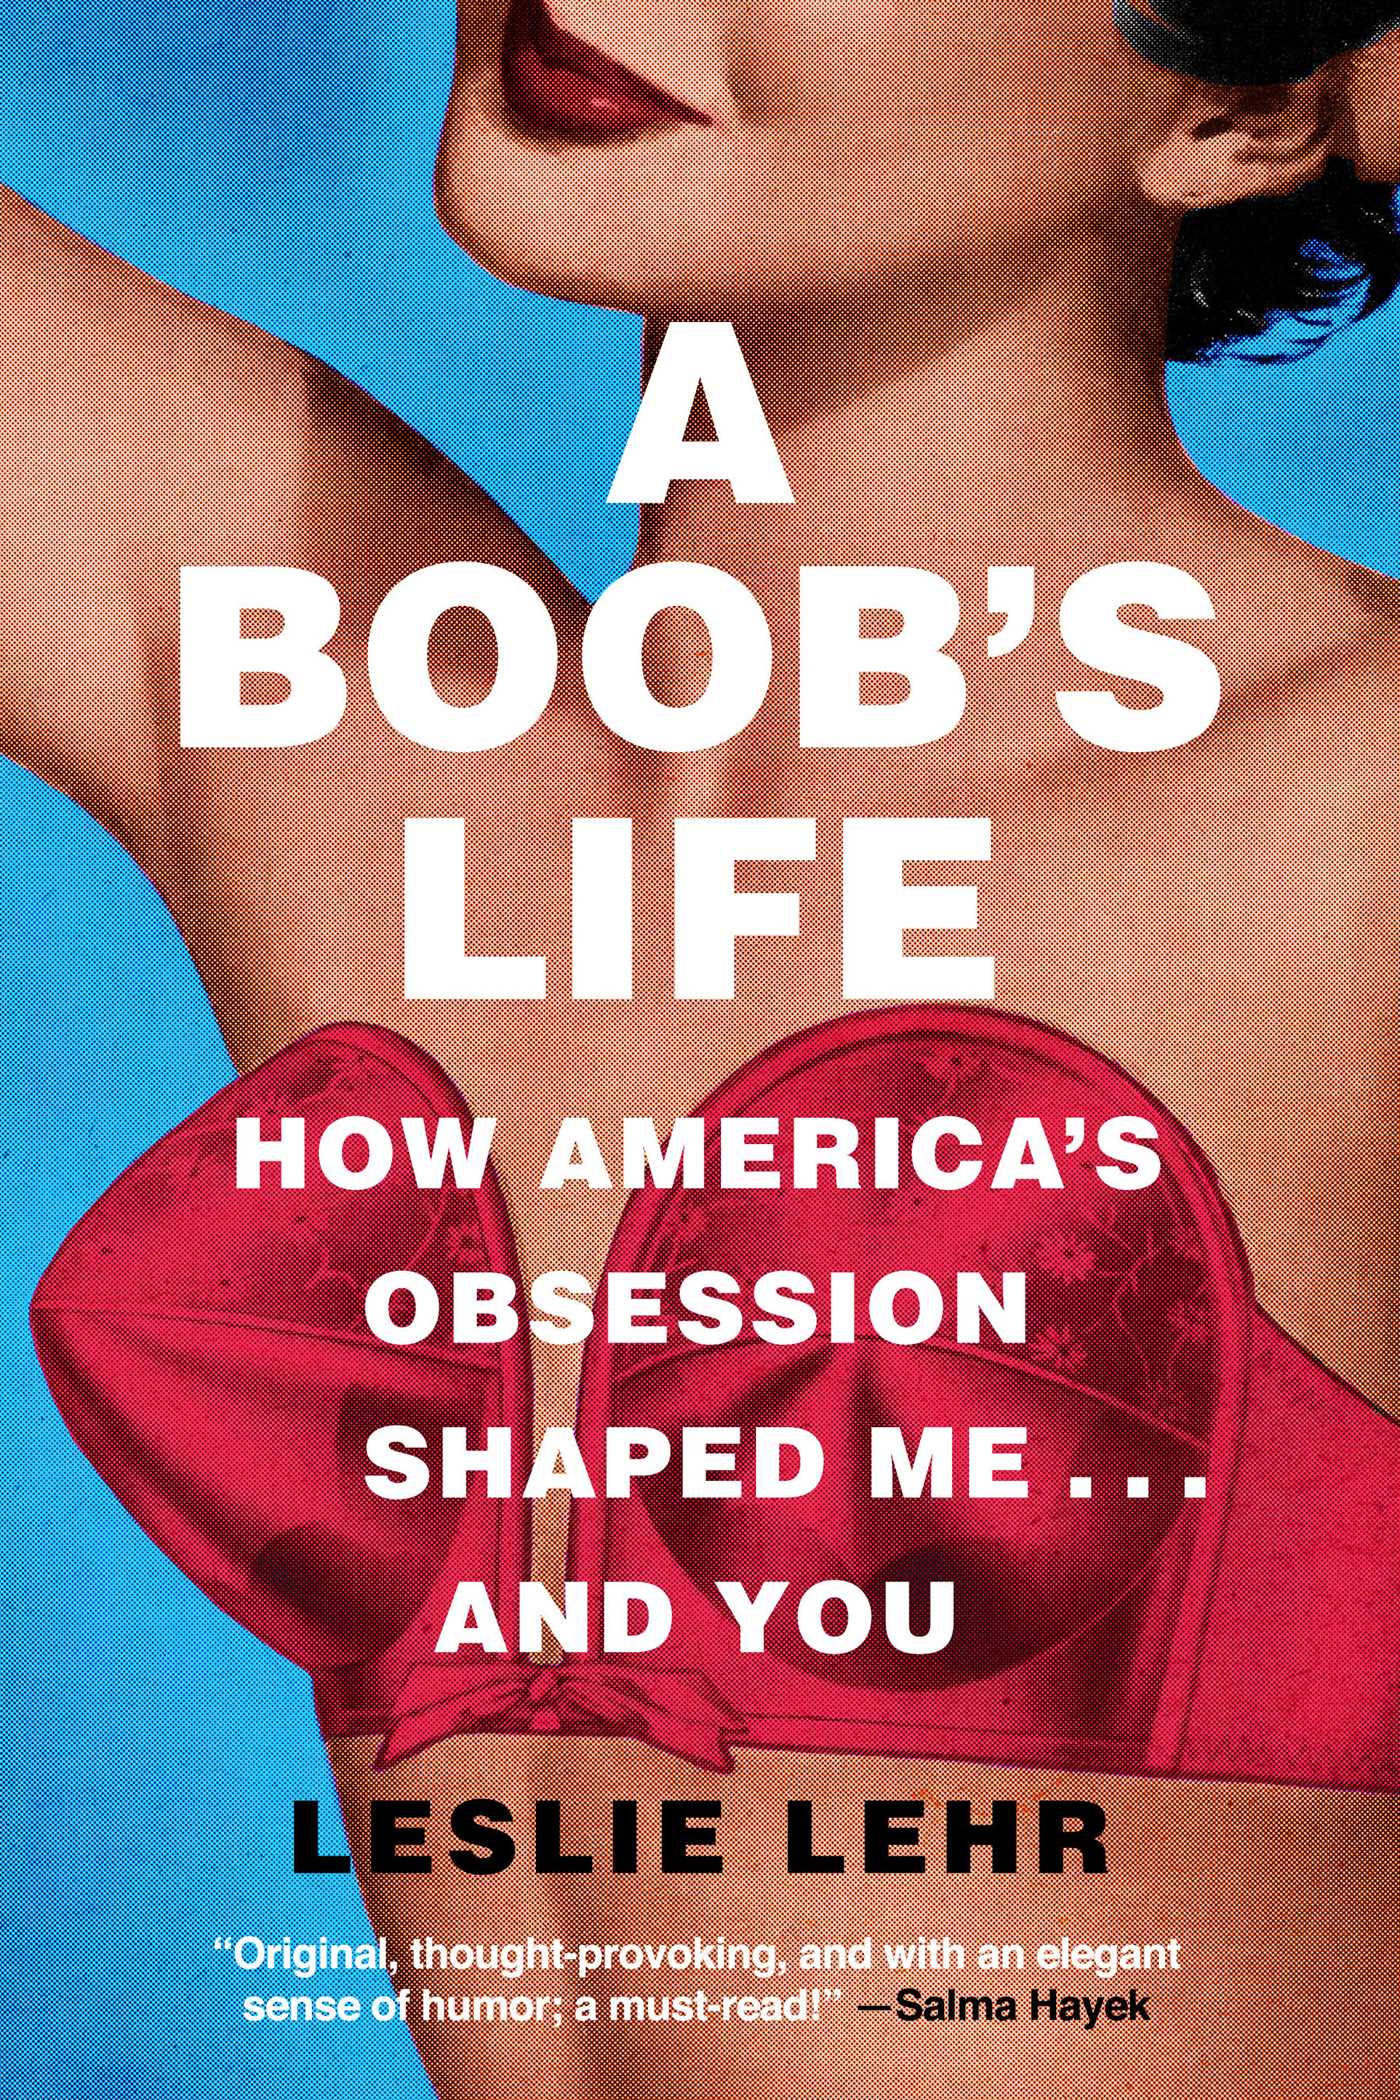 Link to A Boob's Life by Leslie Lehr in the Catalog